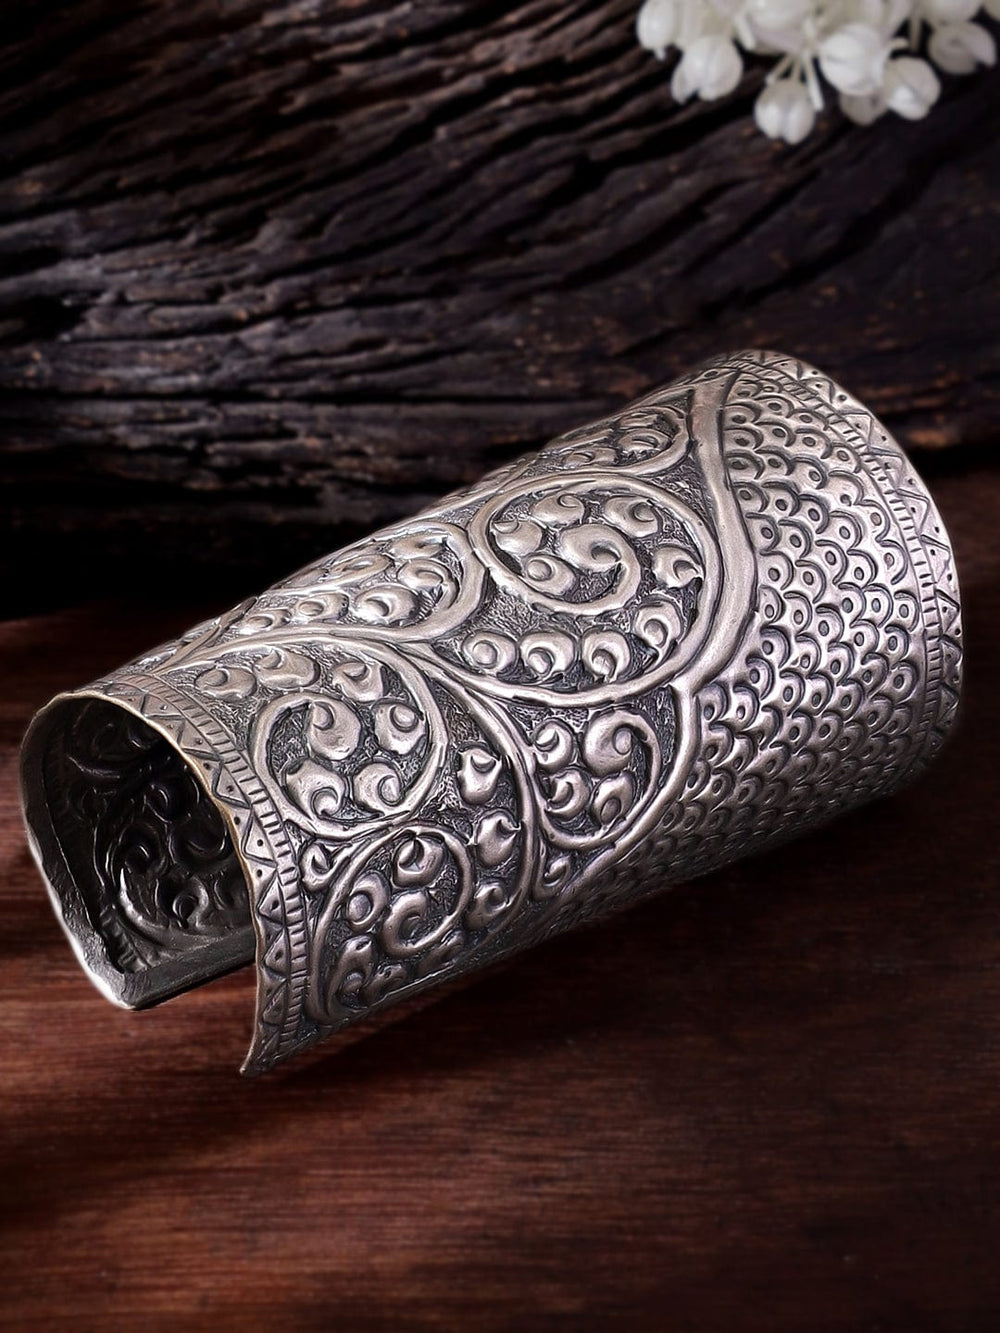 Oxidized Silver Plated embossed Handcrafted Statement Hand Cuff Bangles & Bracelets